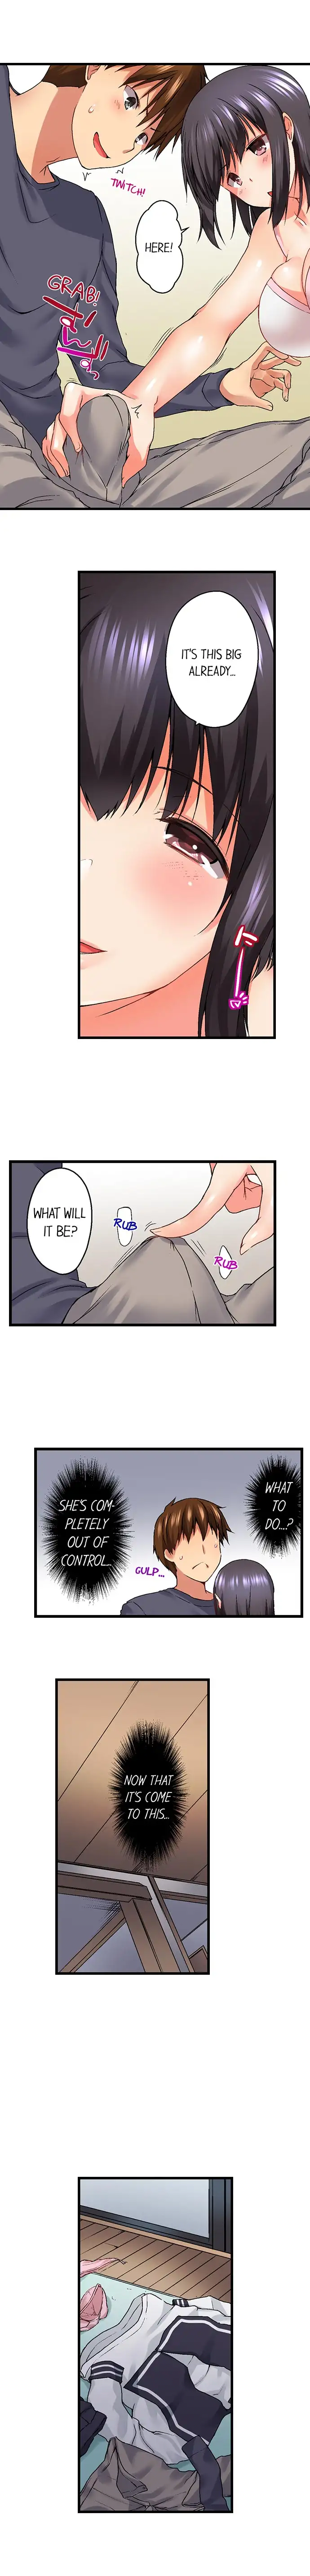 My Brother’s Slipped Inside Me in The Bathtub - Chapter 11 Page 3